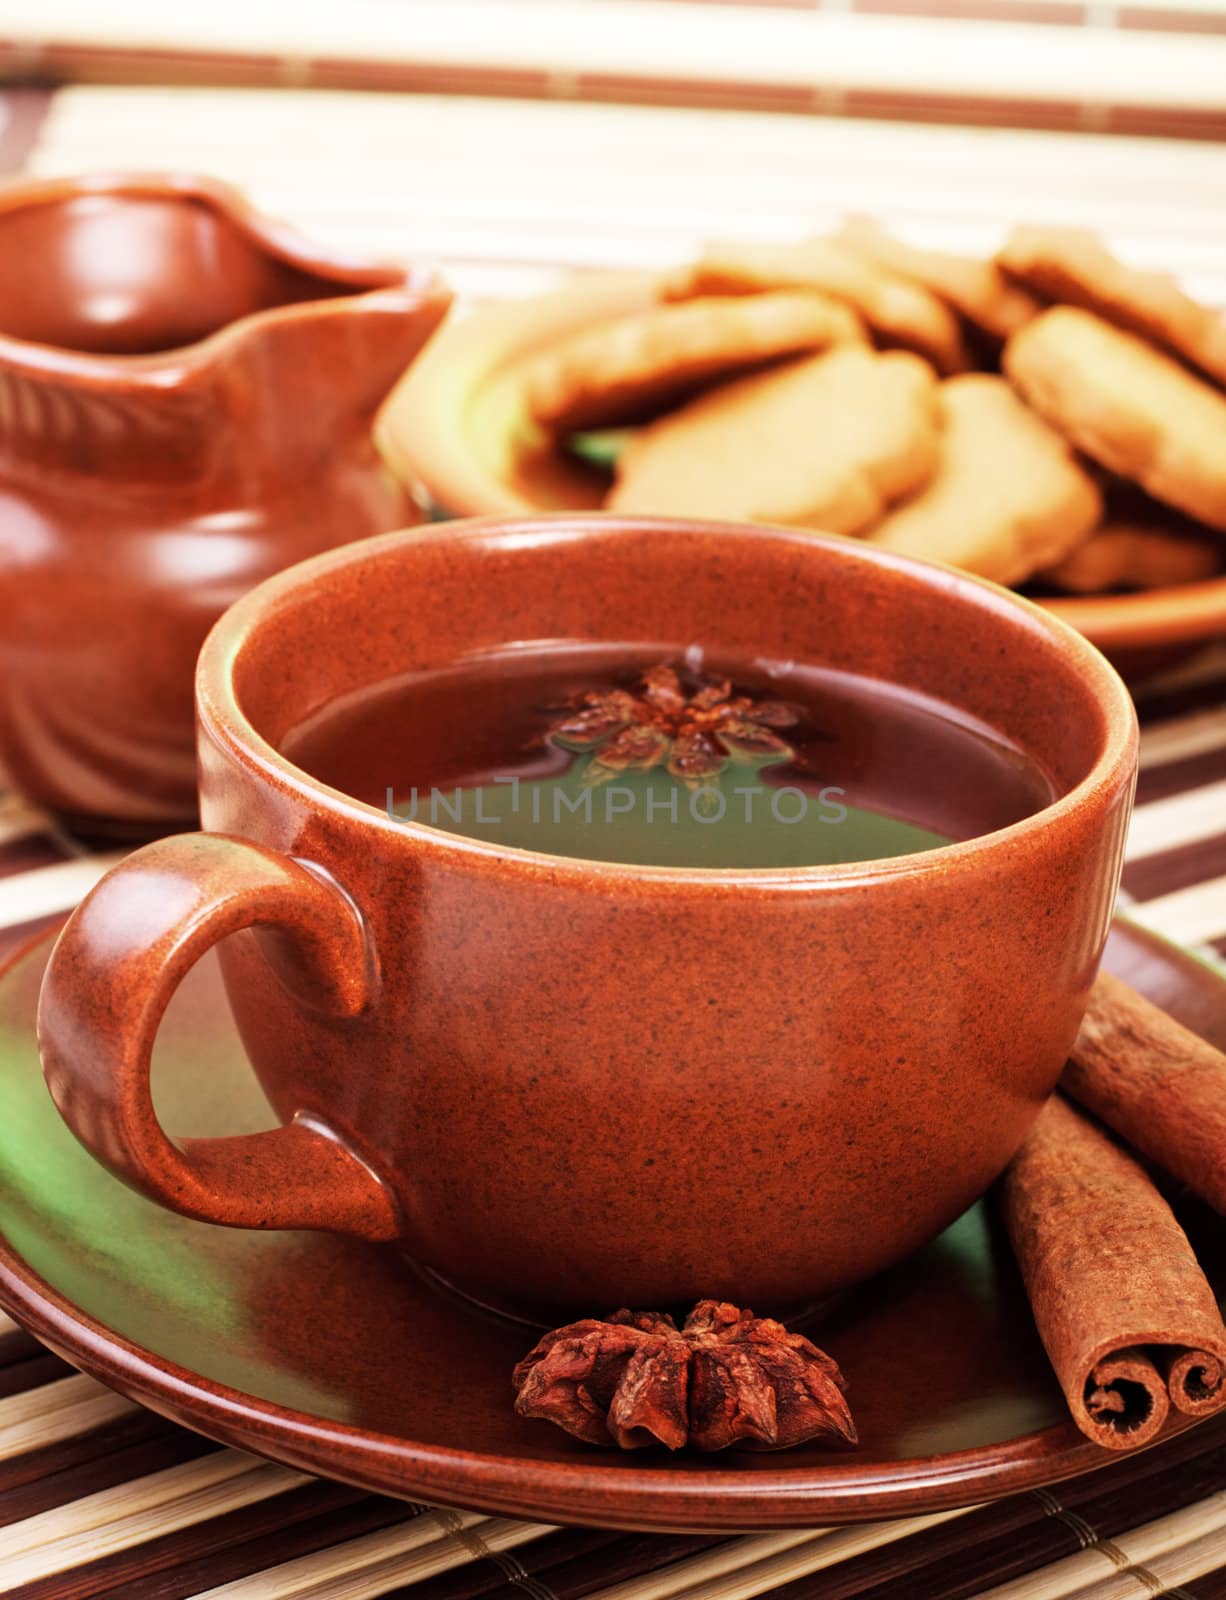 tea with cinnamon sticks and star anise by petr_malyshev